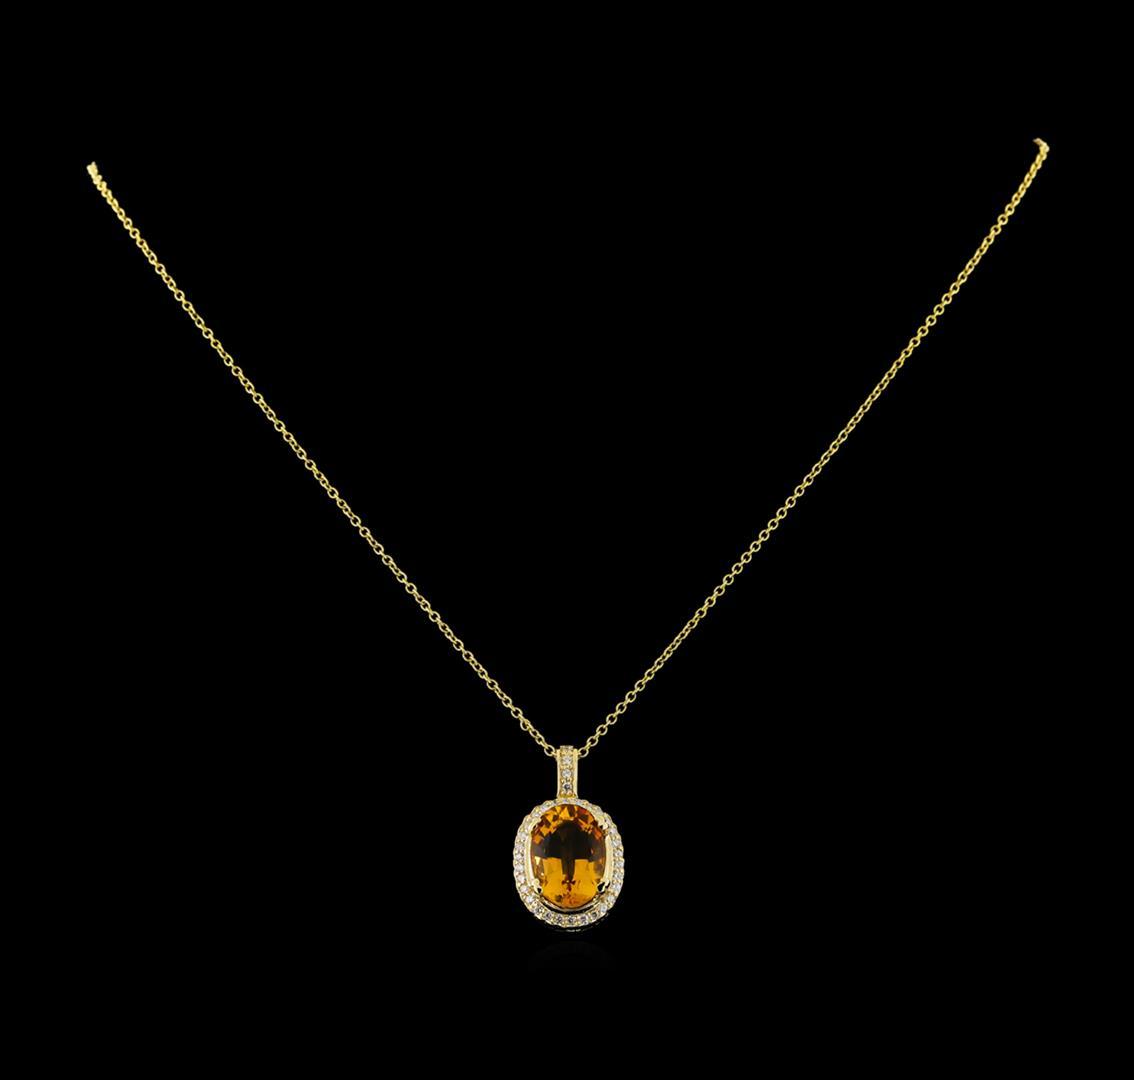 5.45 ctw Citrine and Diamond Pendant With Chain - 14KT Yellow Gold